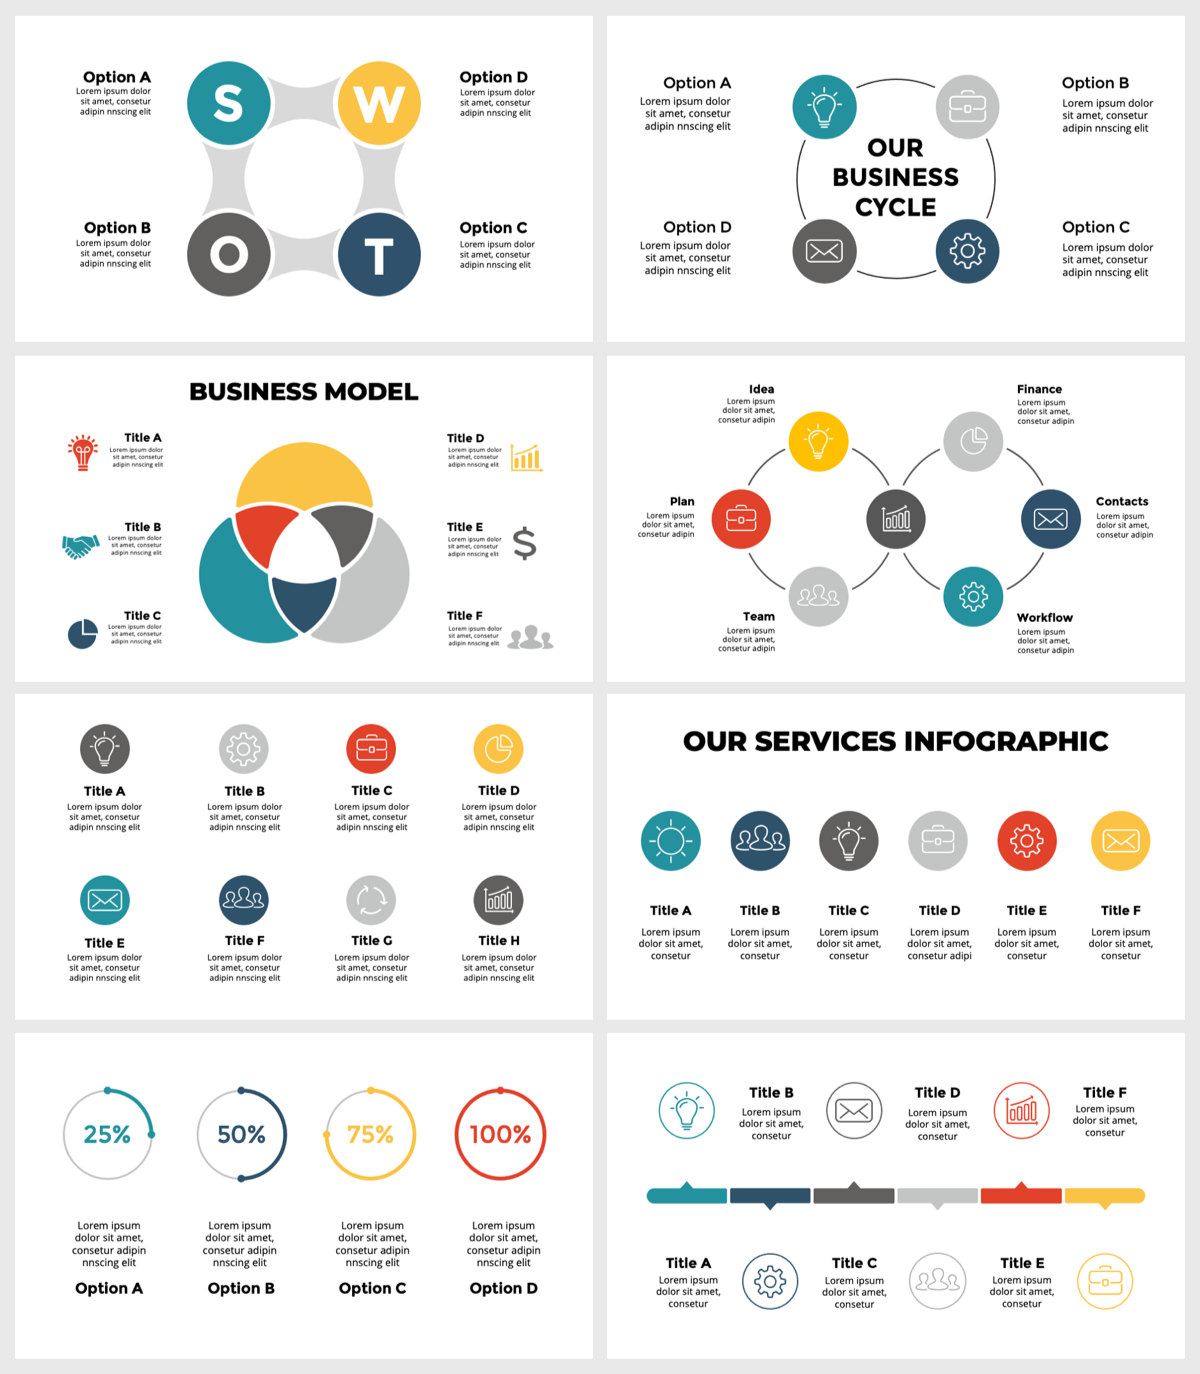 Wowly - 3500 Infographics & Presentation Templates! Updated! PowerPoint Canva Figma Sketch Ai Psd. - 186